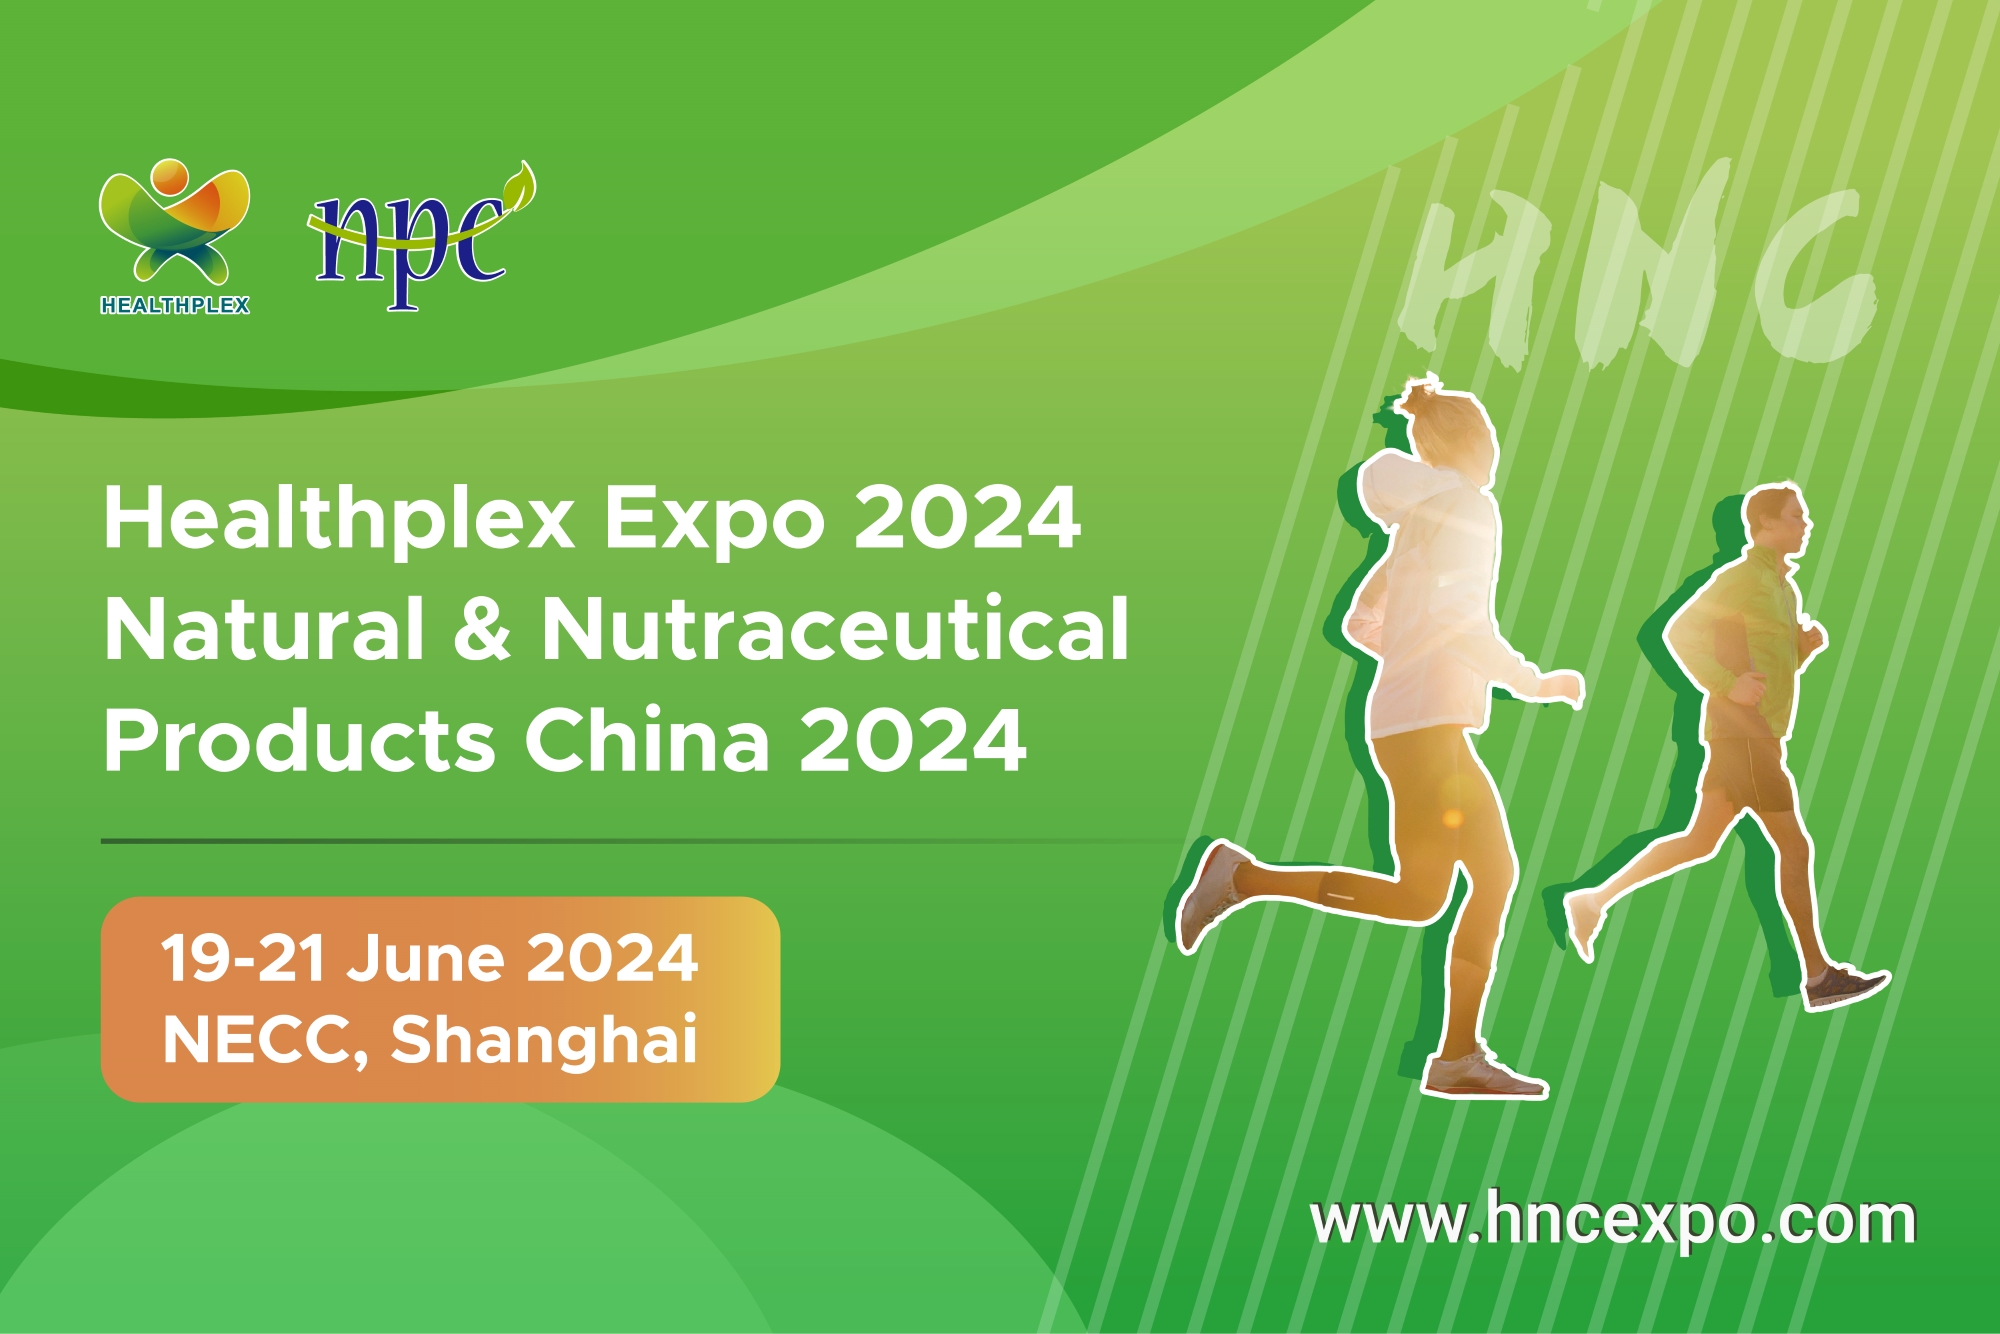 Healthplex Expo 2024, Natural & Nutraceutical Products China 2024